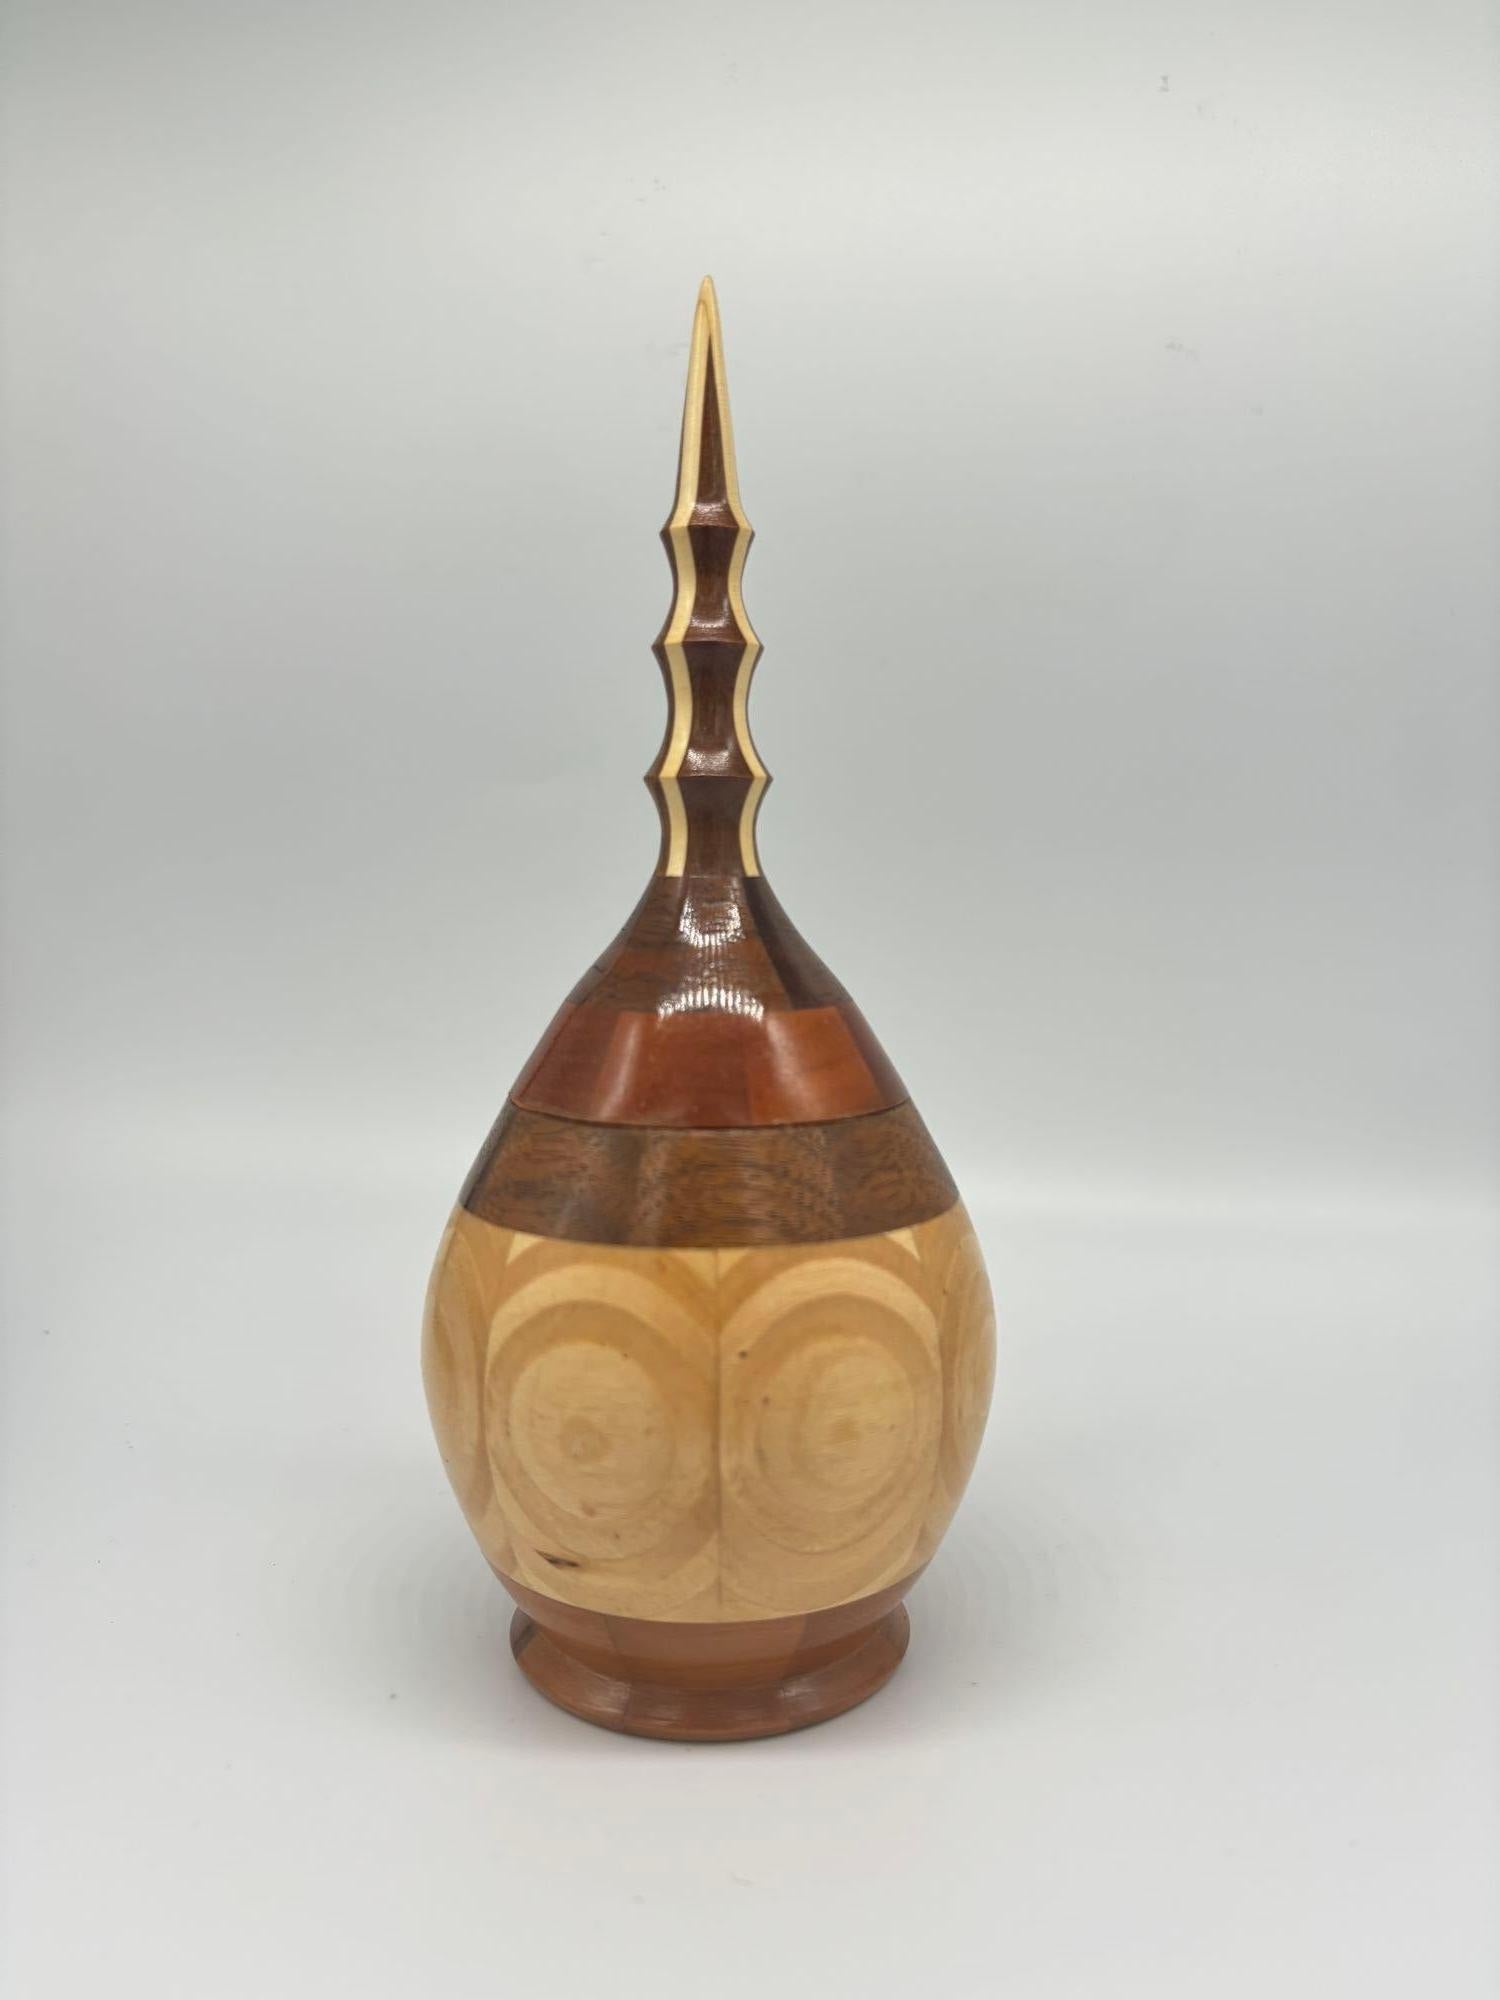 Presenting a stunning Hand Carved Marquetry Inlay Pear Shaped Vessel with Lid. Crafted with precision and care, this exquisite vessel showcases intricate marquetry inlay, adding a touch of artistry and elegance to any space. Its unique pear shape